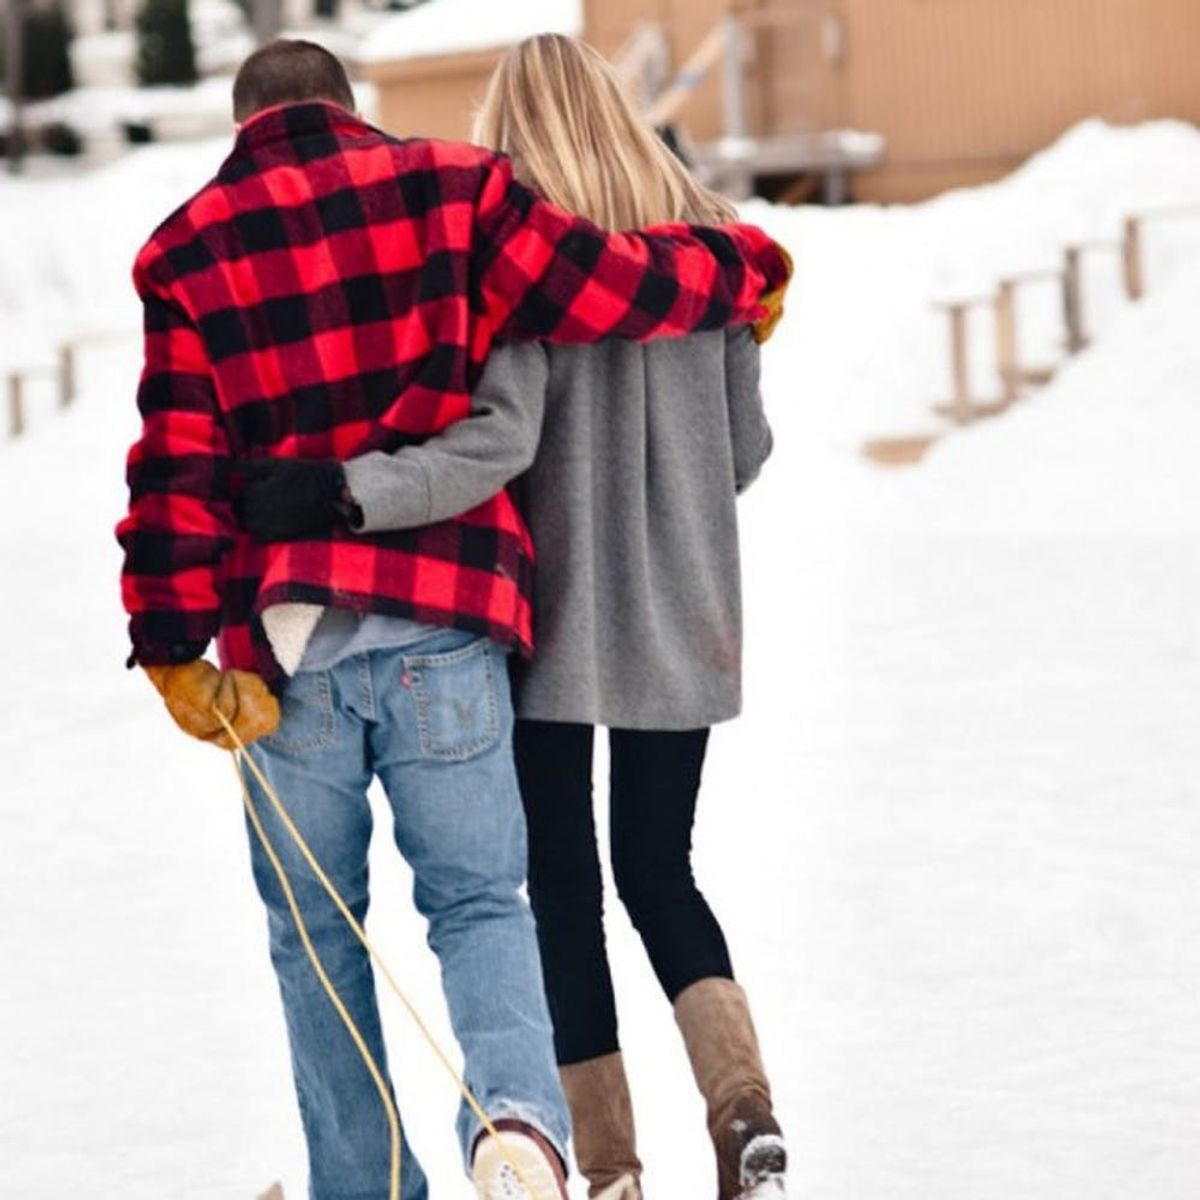 10 Winter Date Ideas You’ll Totes Fall in Love With